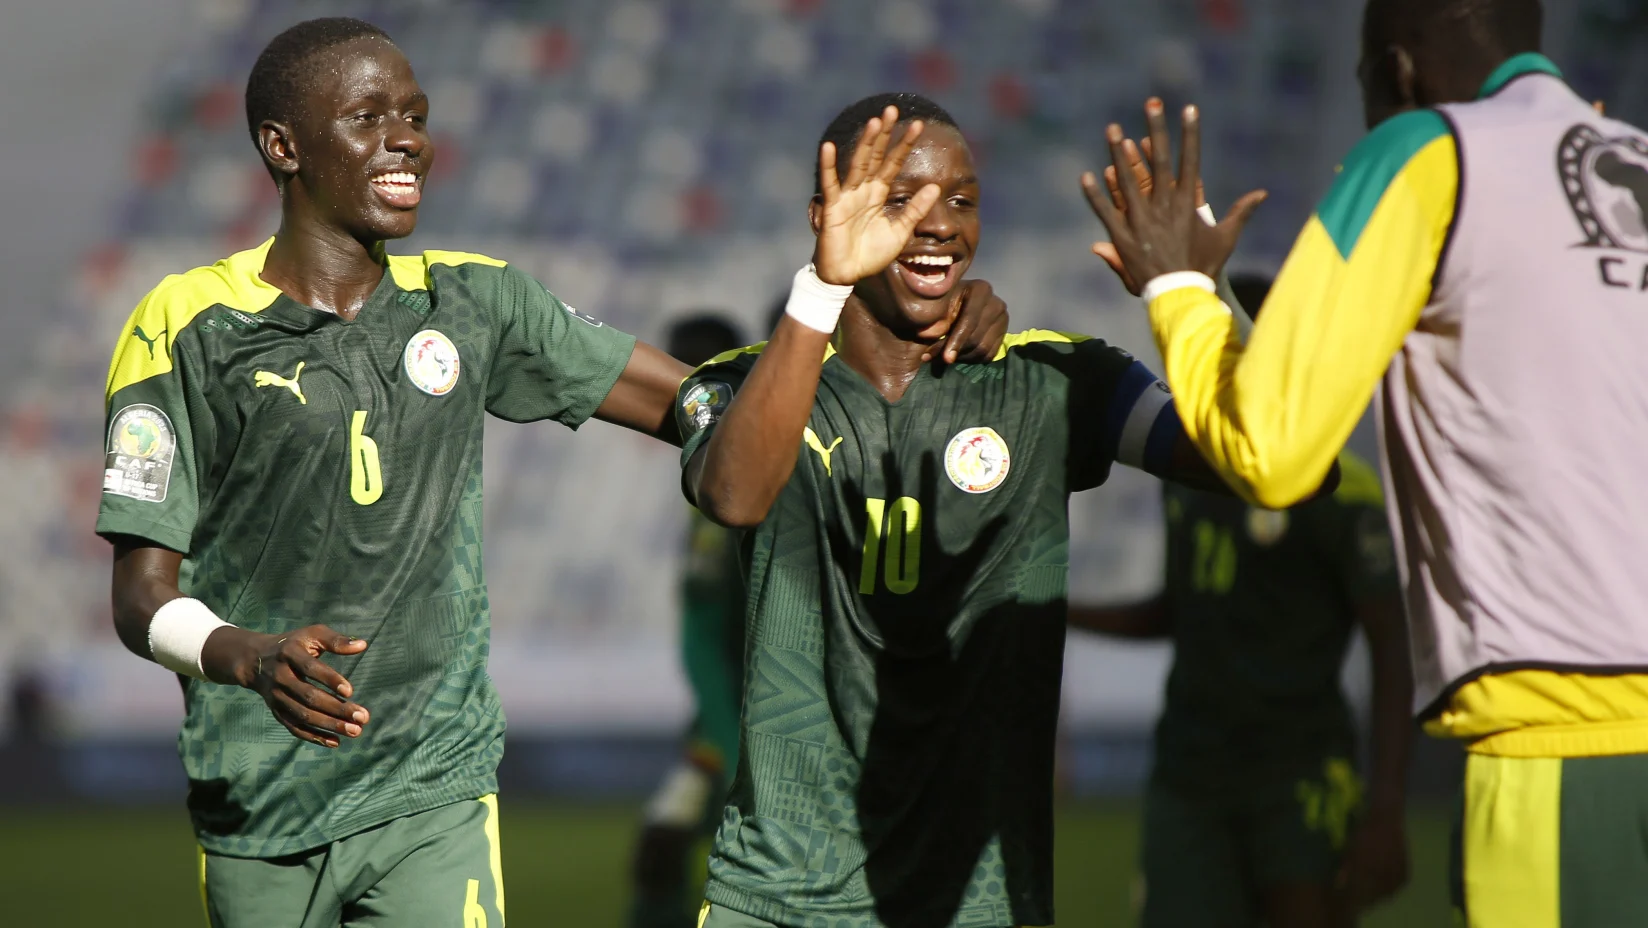 U17 AFCON: 5 Classes Golden Eaglets can be taught from Senegal’s 5-0 crushing of South Africa